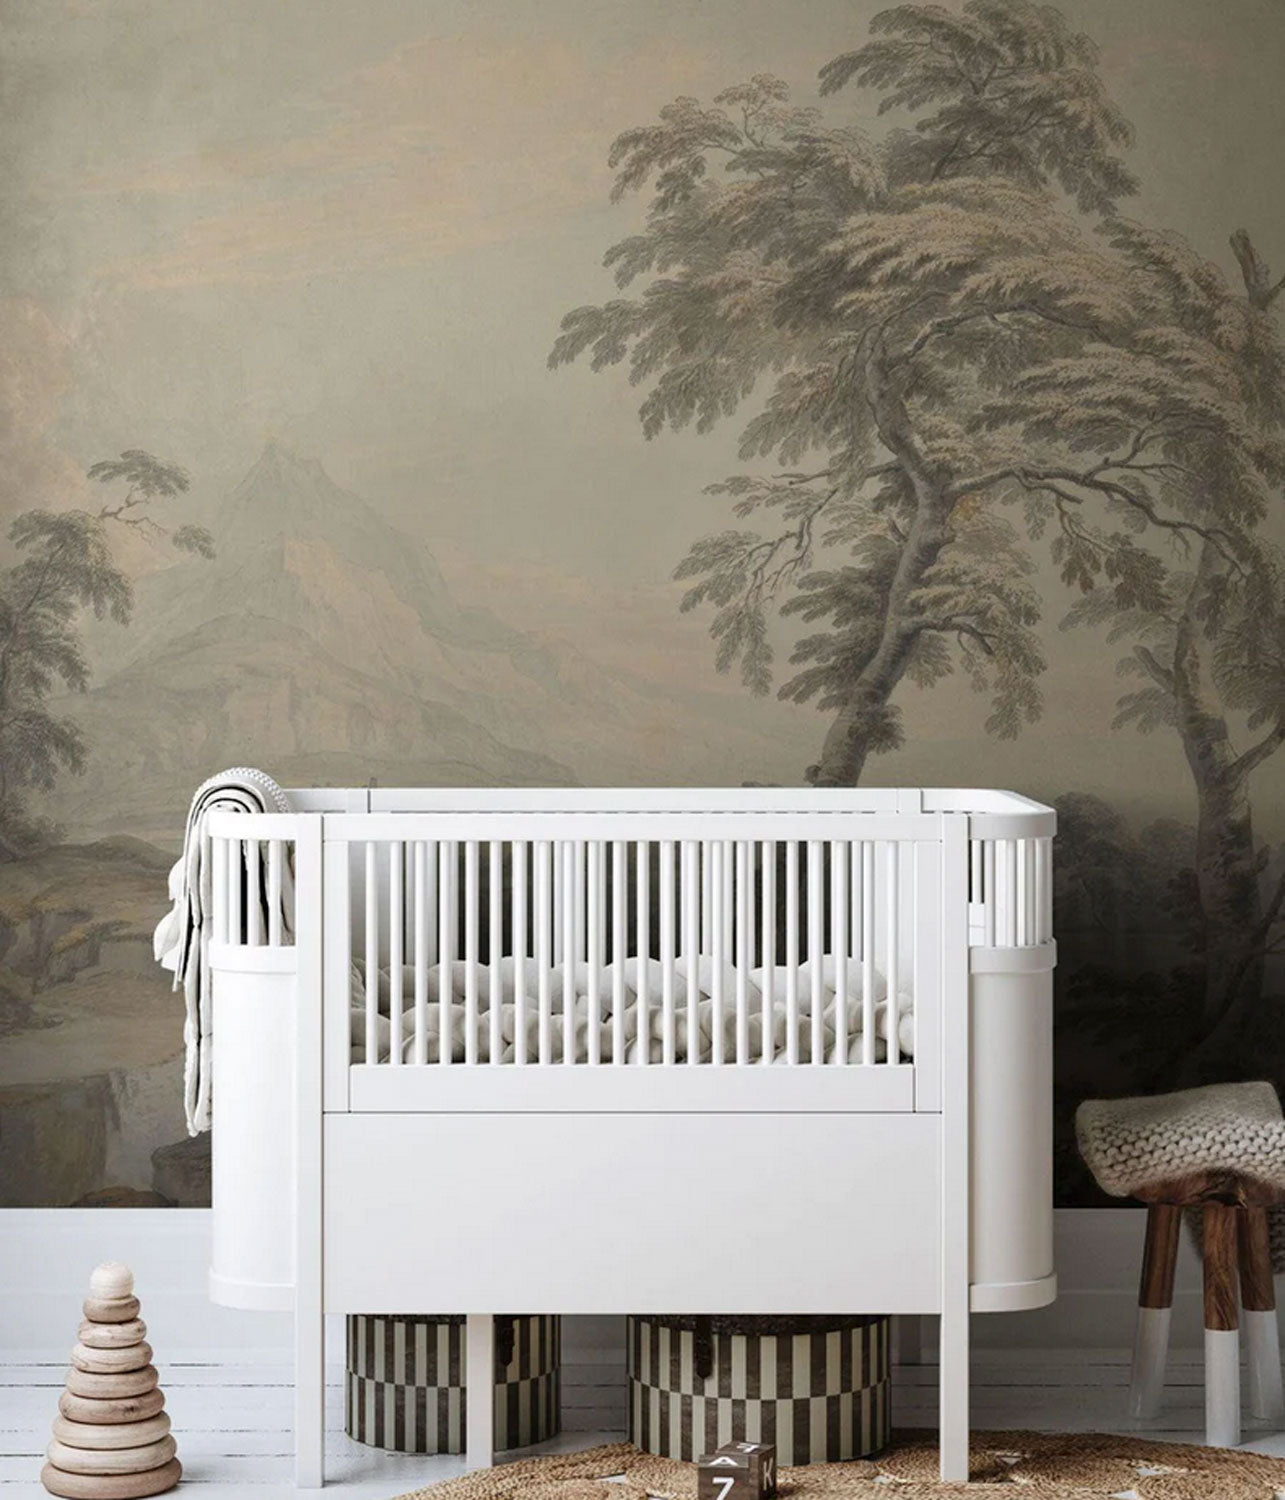 The Italianate Landscape Wall Mural for nursery